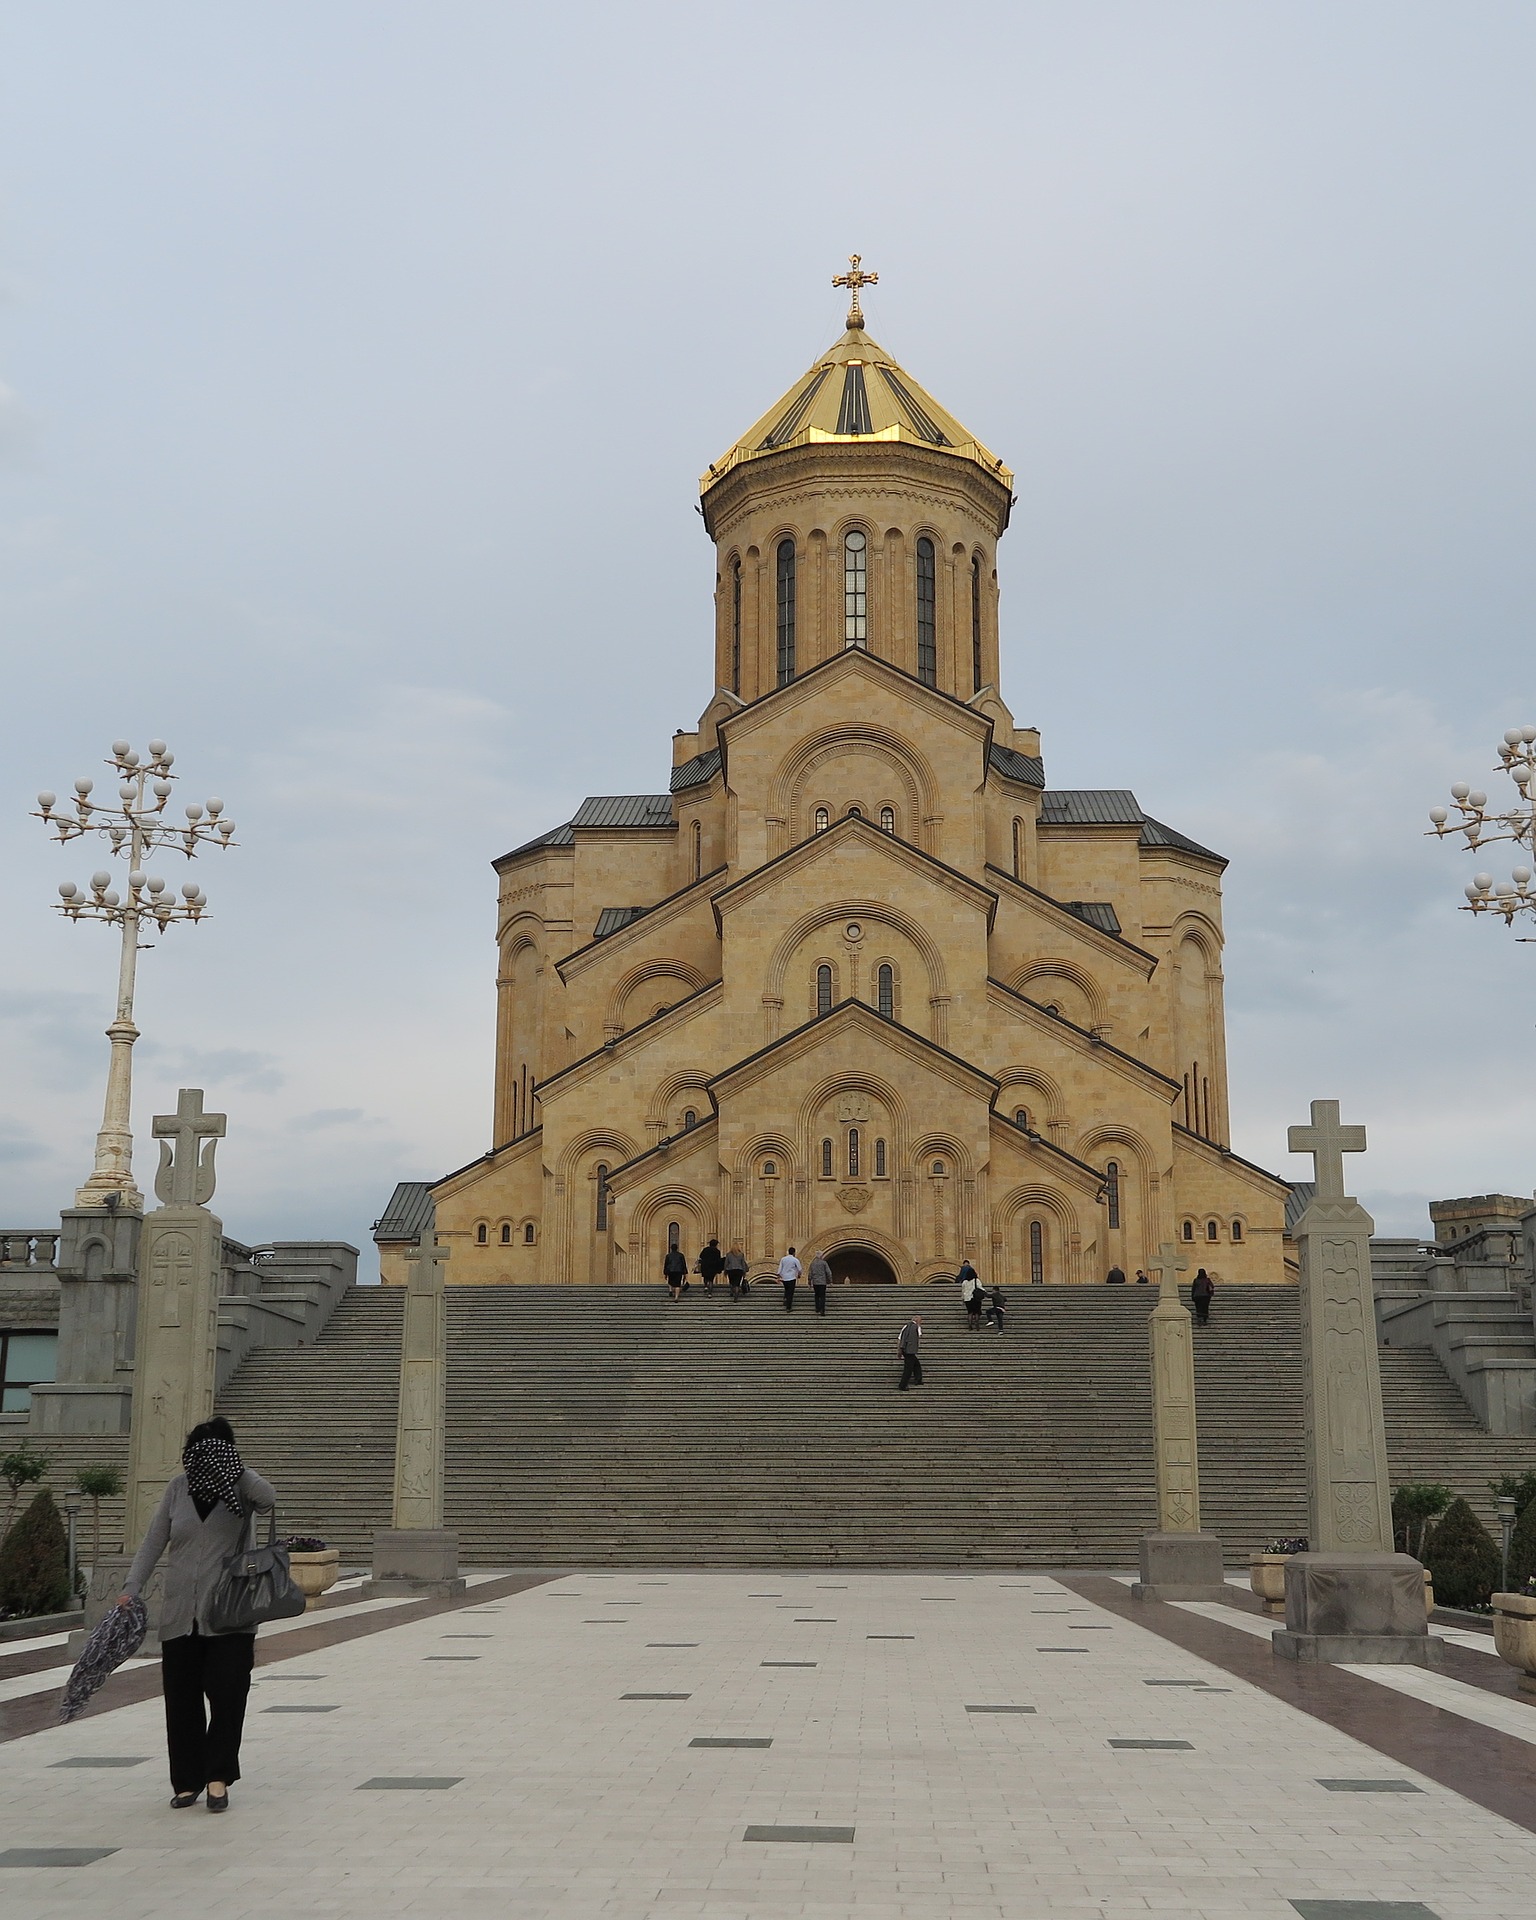 The Holy Trinity Cathedral in Tbilisi